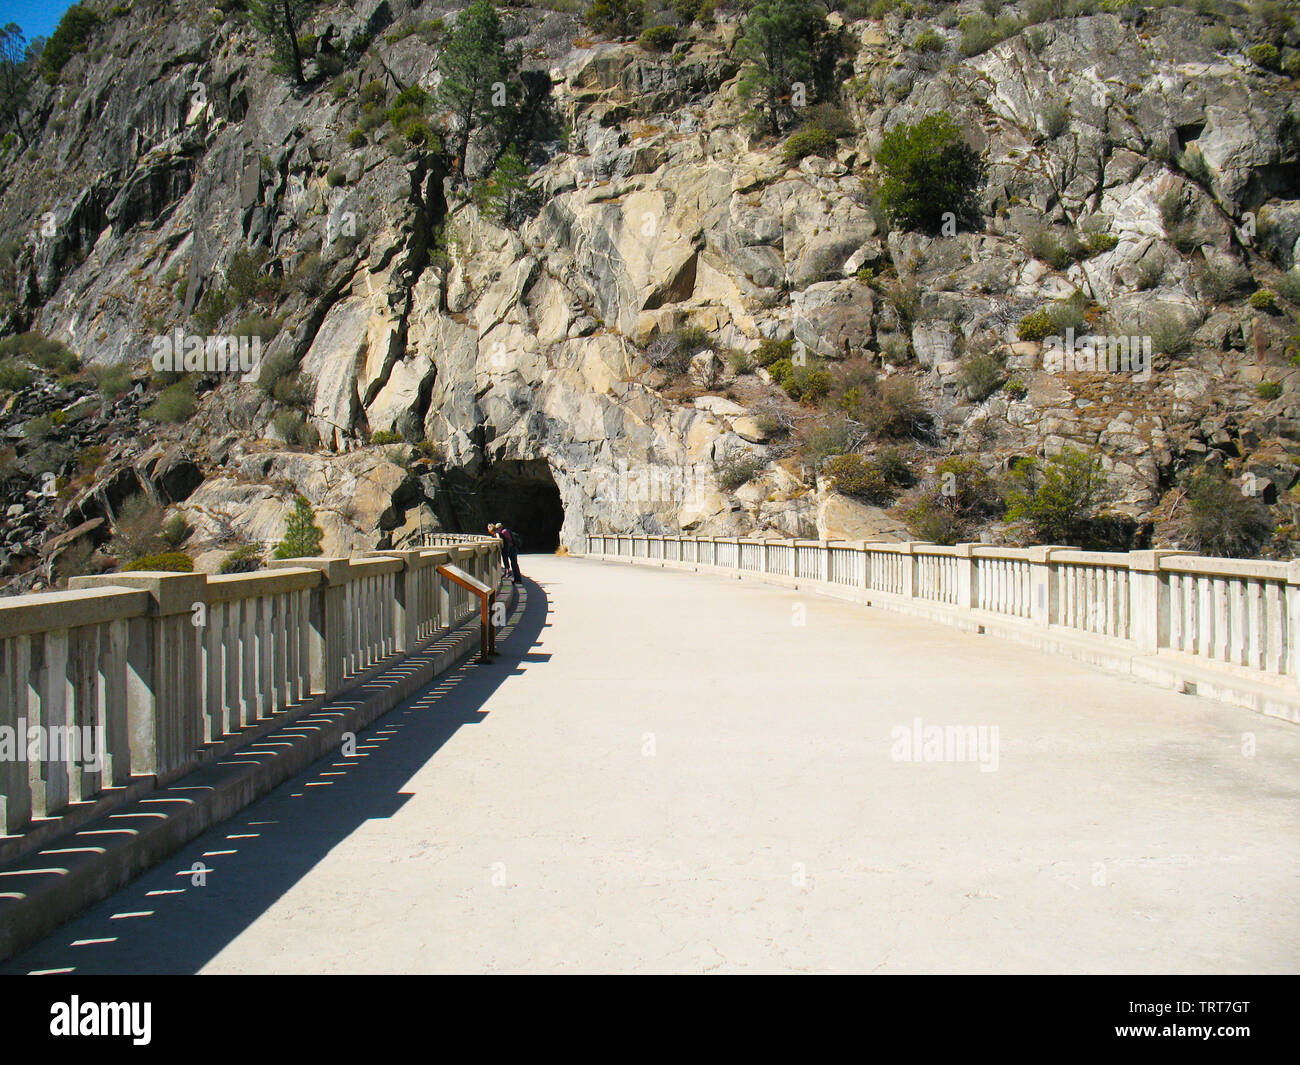 O'Shaughnessy Dam Hetch Hetchy reservoir, Banque D'Images